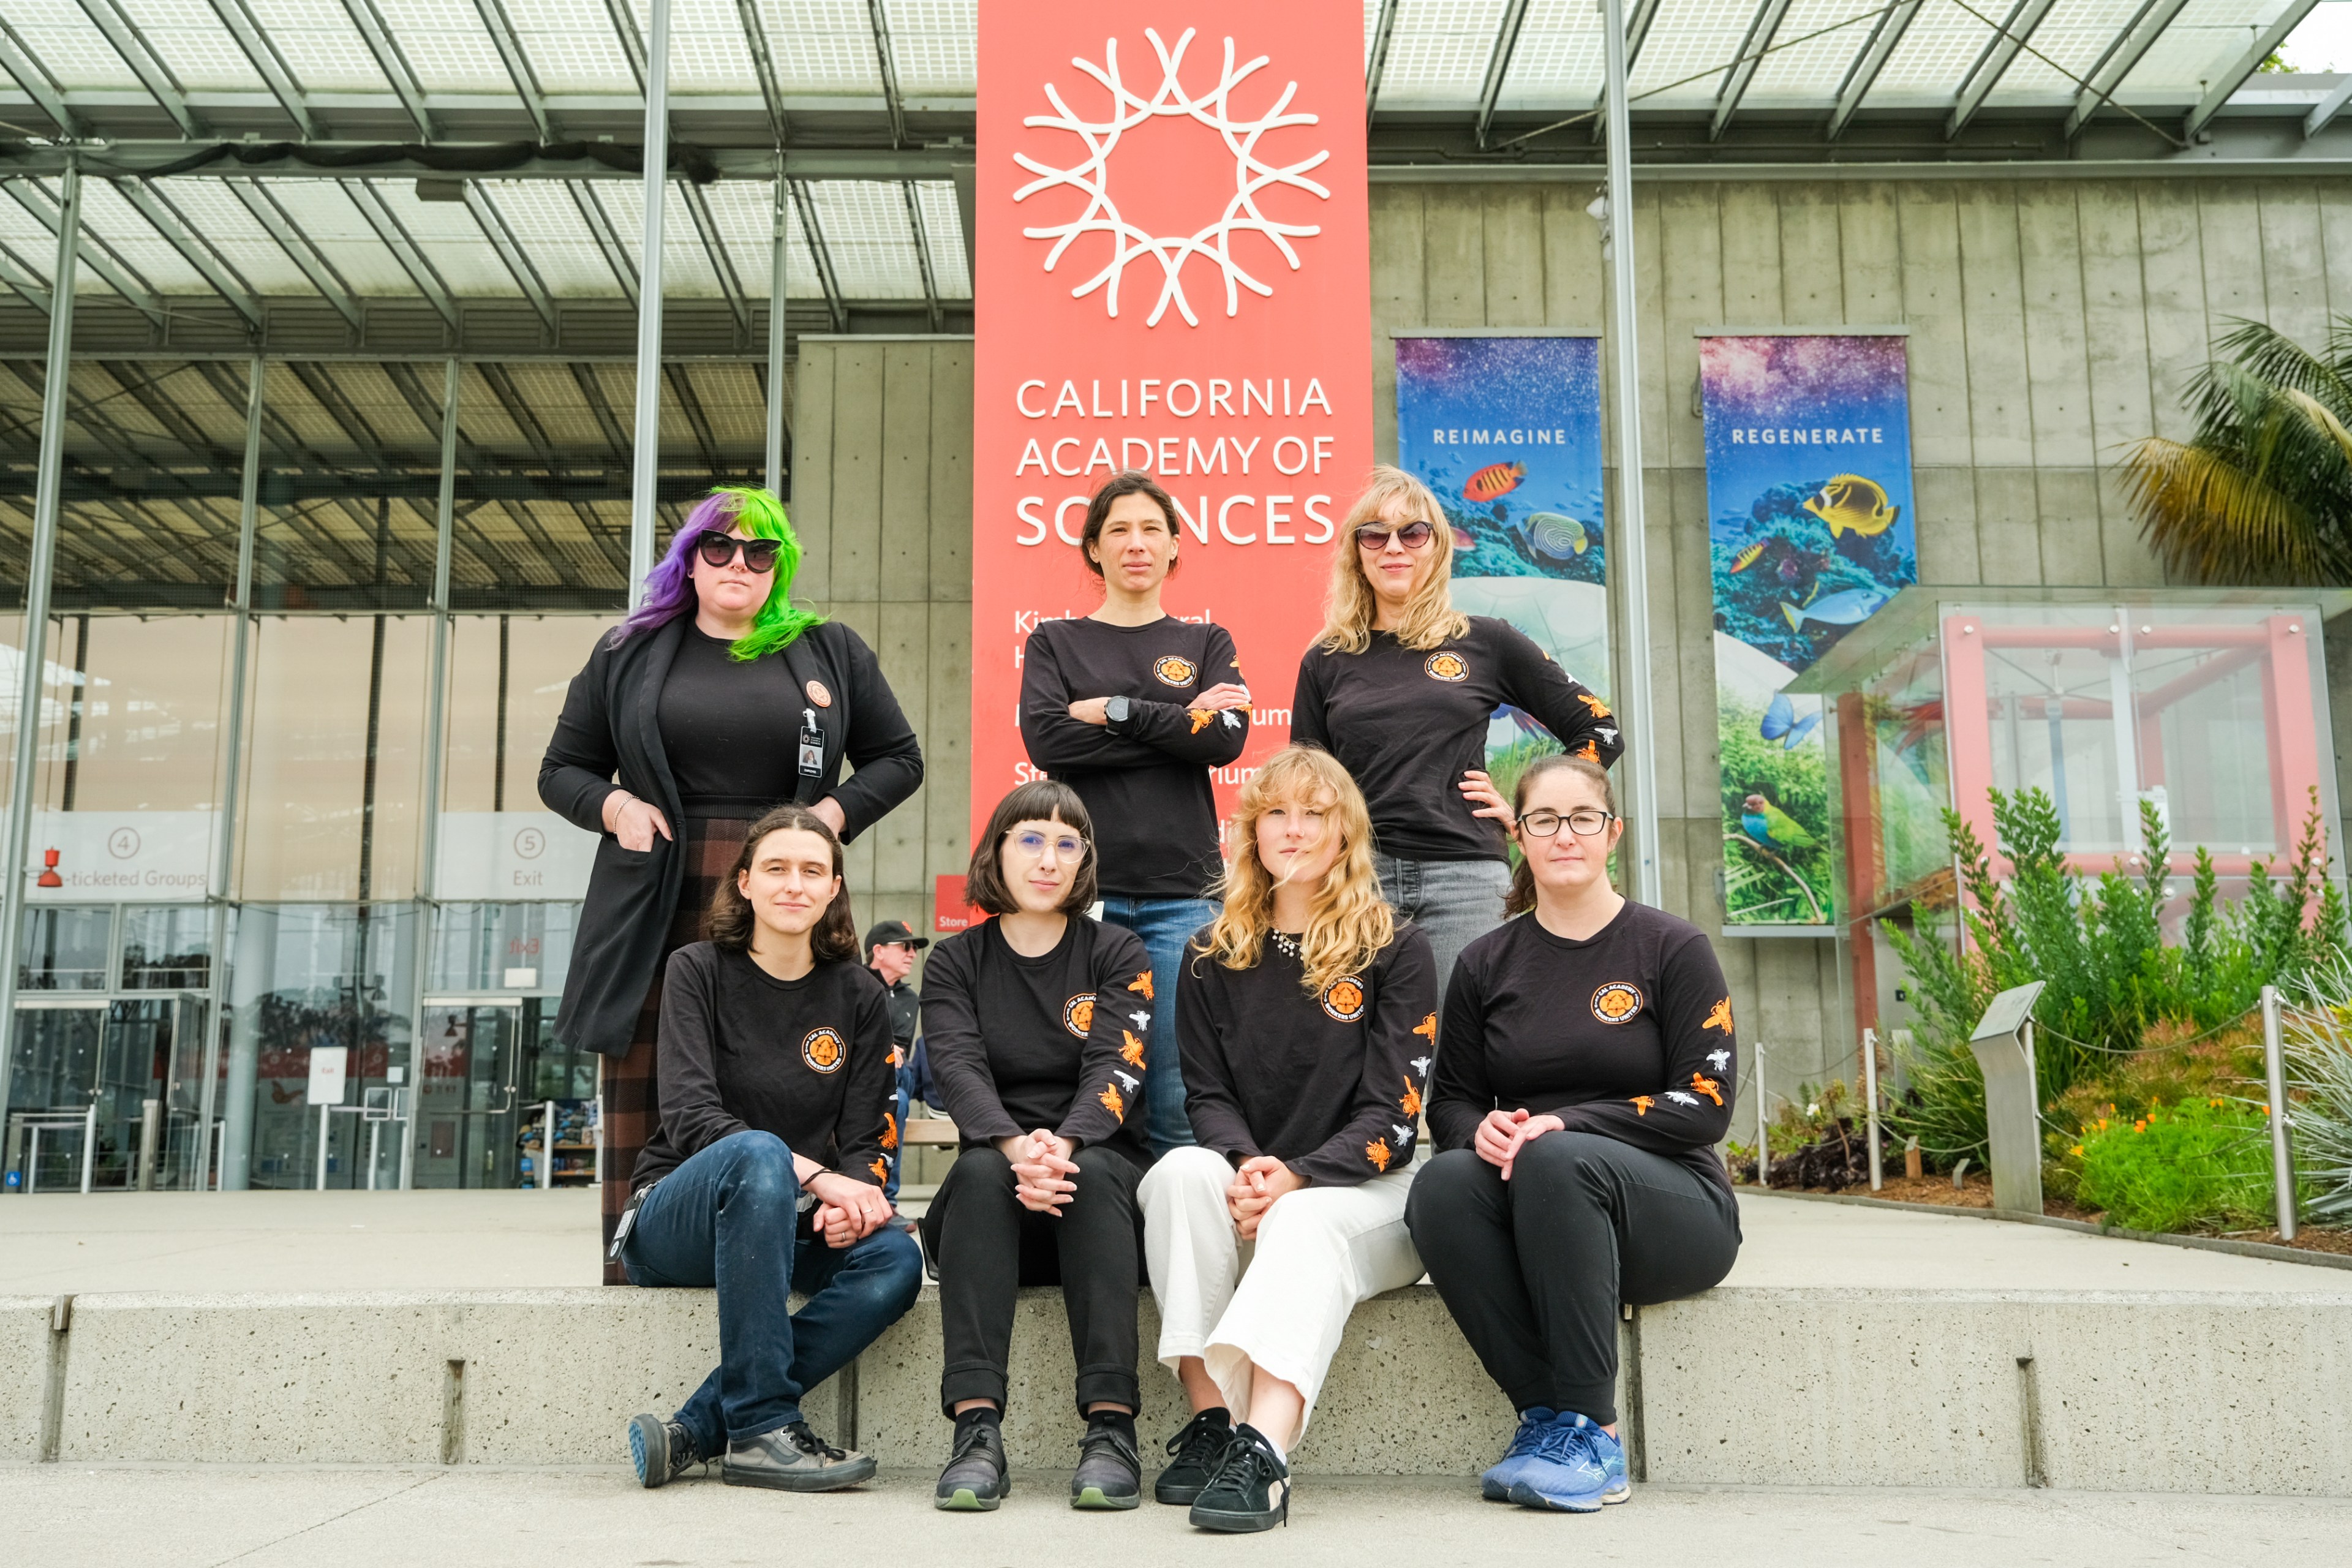 Seven people in matching black tops with orange logos pose in front of a California Academy of Sciences sign, exuding a team spirit.